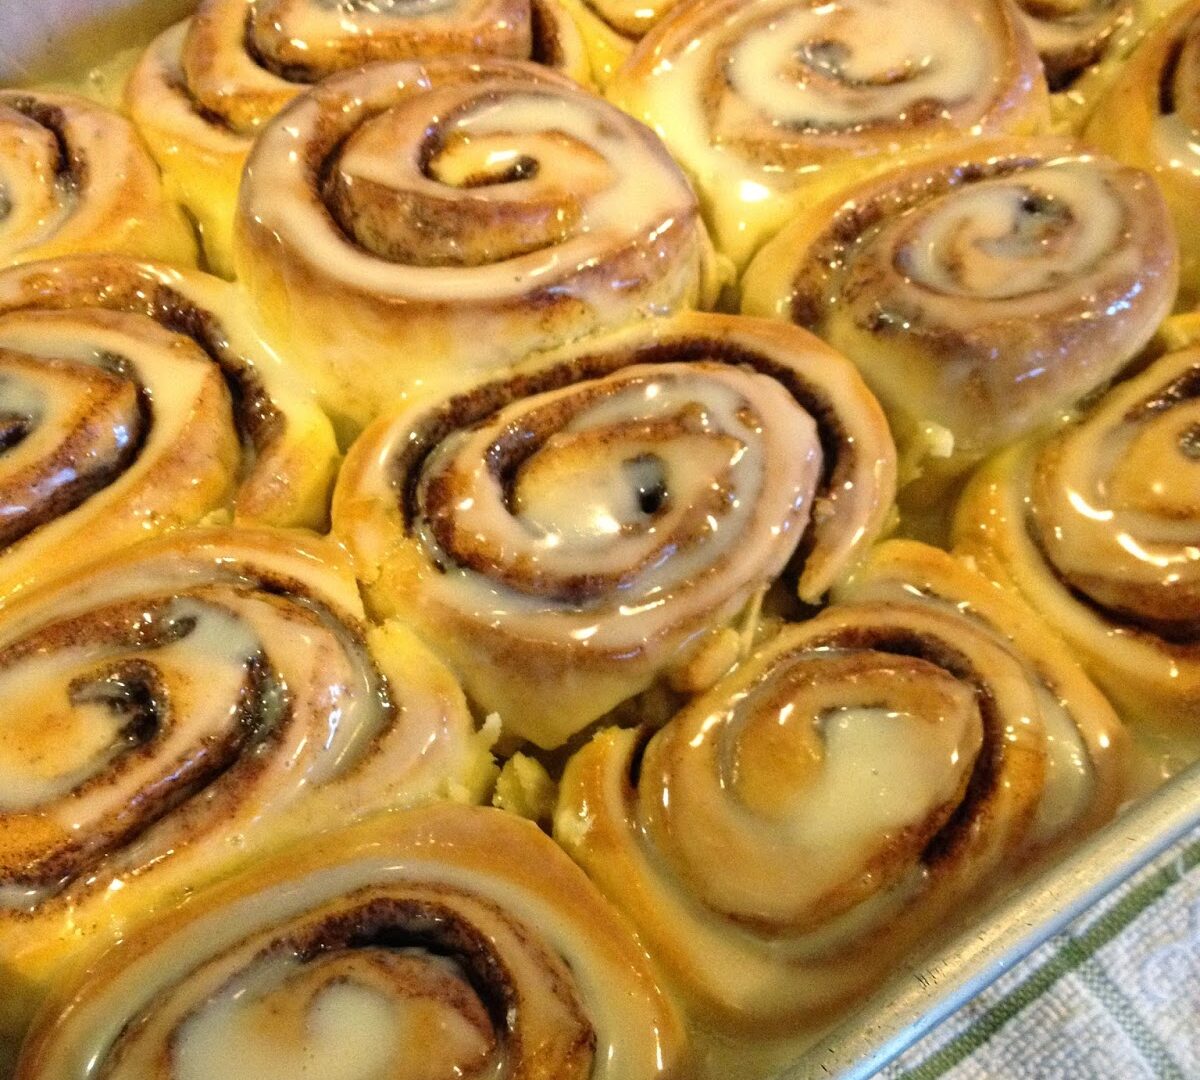 Rolled Cinnamon Rolls filled with butter, cinnamon and sugar, and drenched in icing